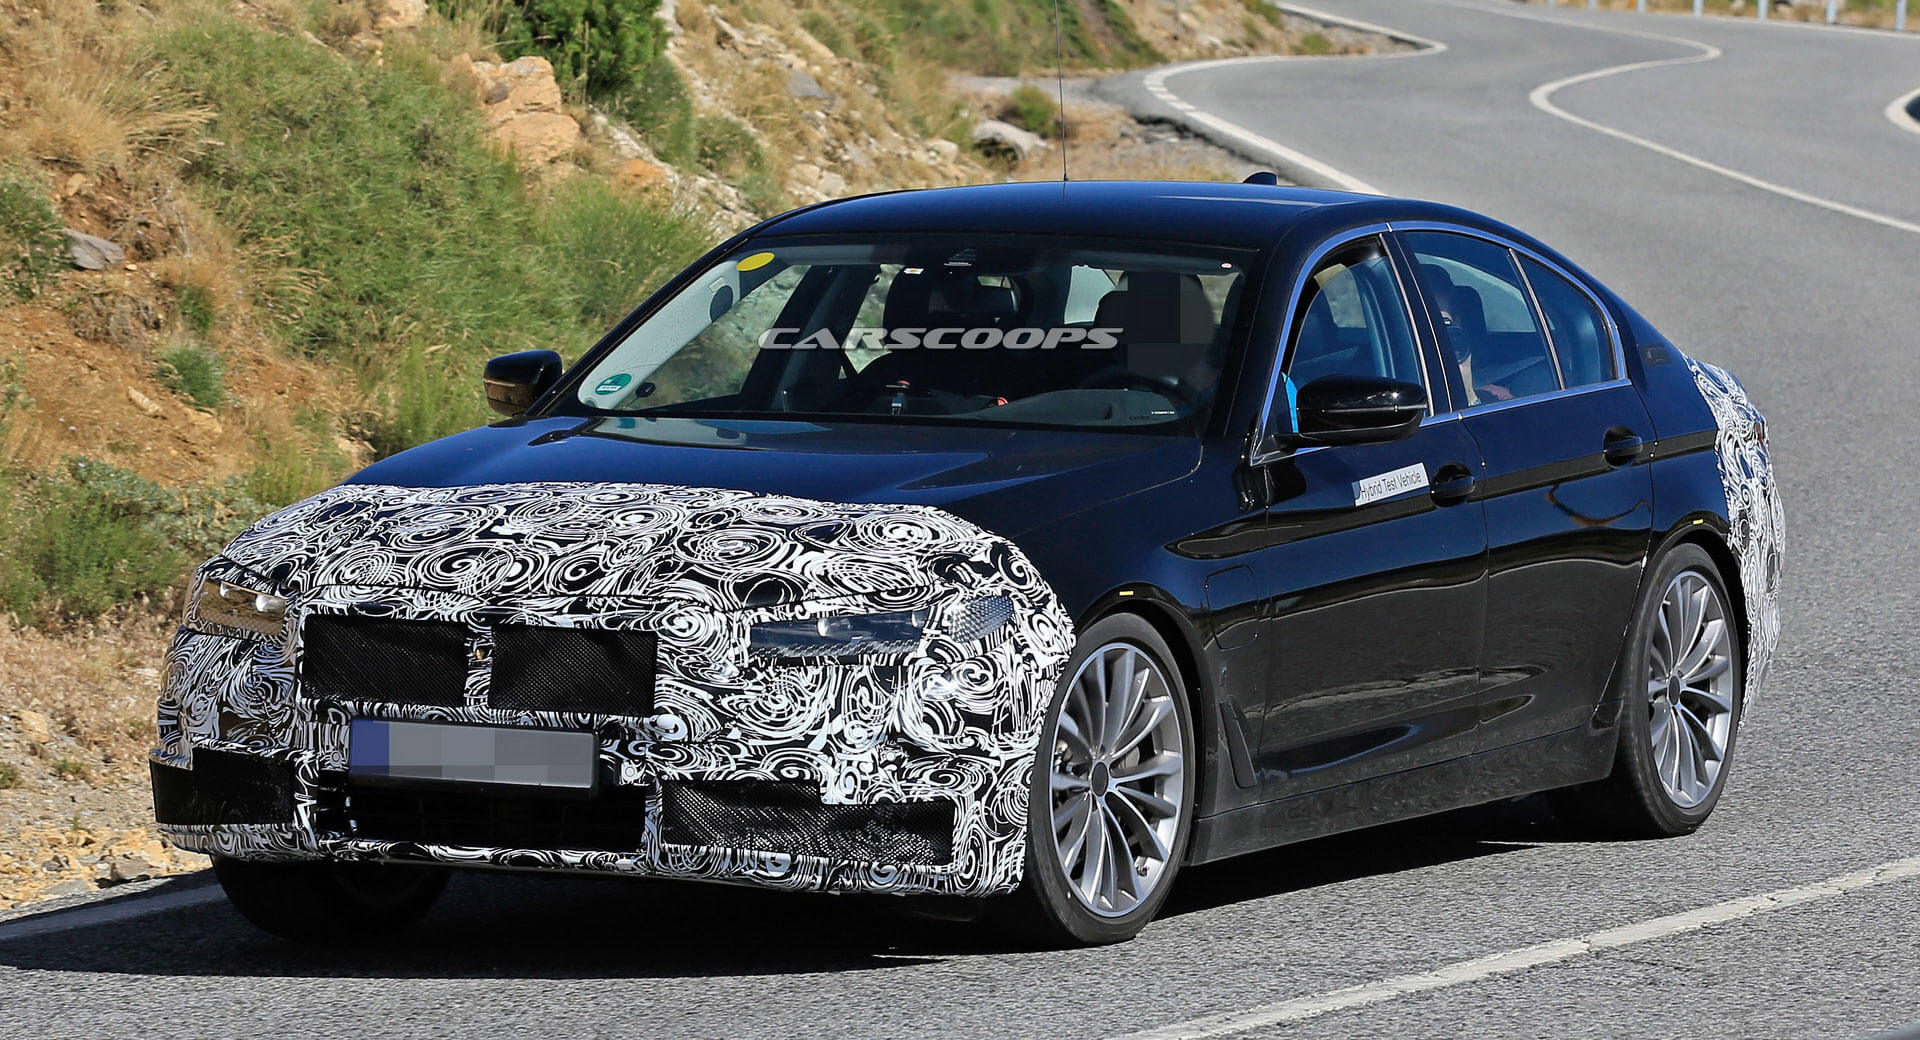 Facelifted 2020 BMW 5-Series Sedan Boasts Larger Grille, New Headlights